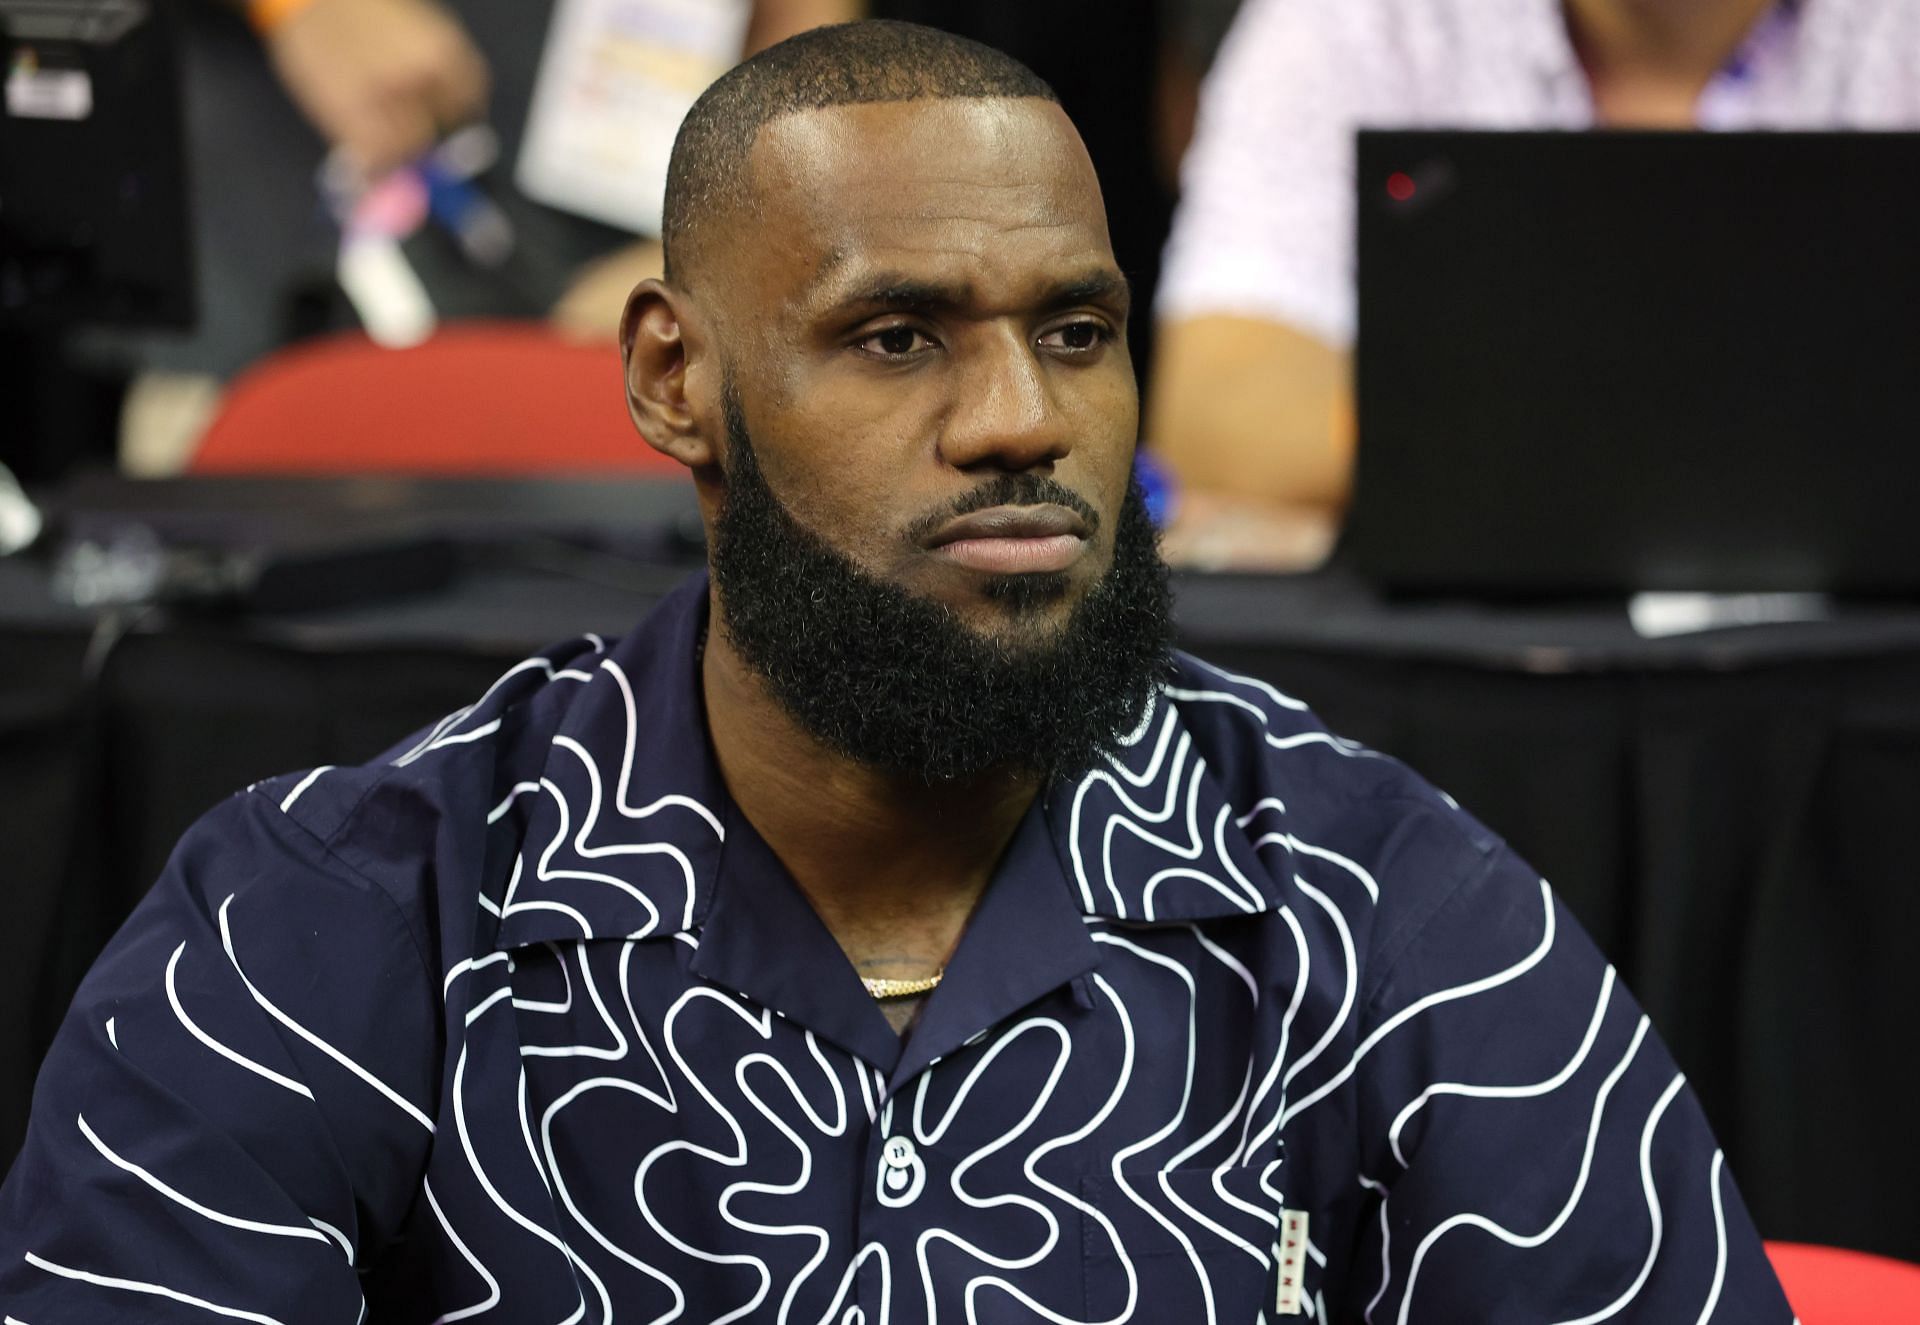 LeBron James of the LA Lakers attends a game during the 2022 NBA Summer League.